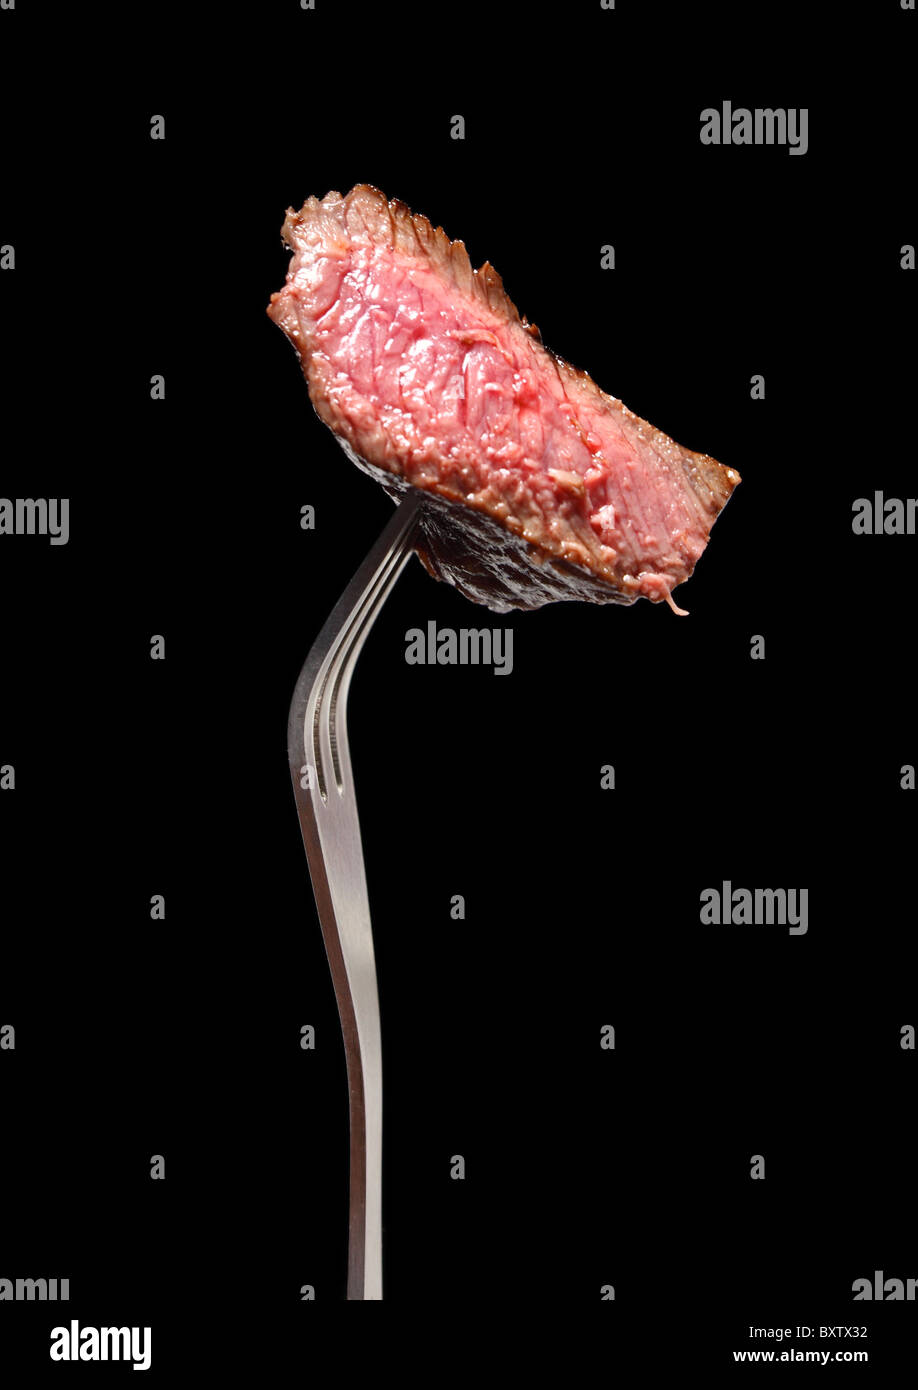 A piece of grilled steak on a fork, isolated on black. Stock Photo